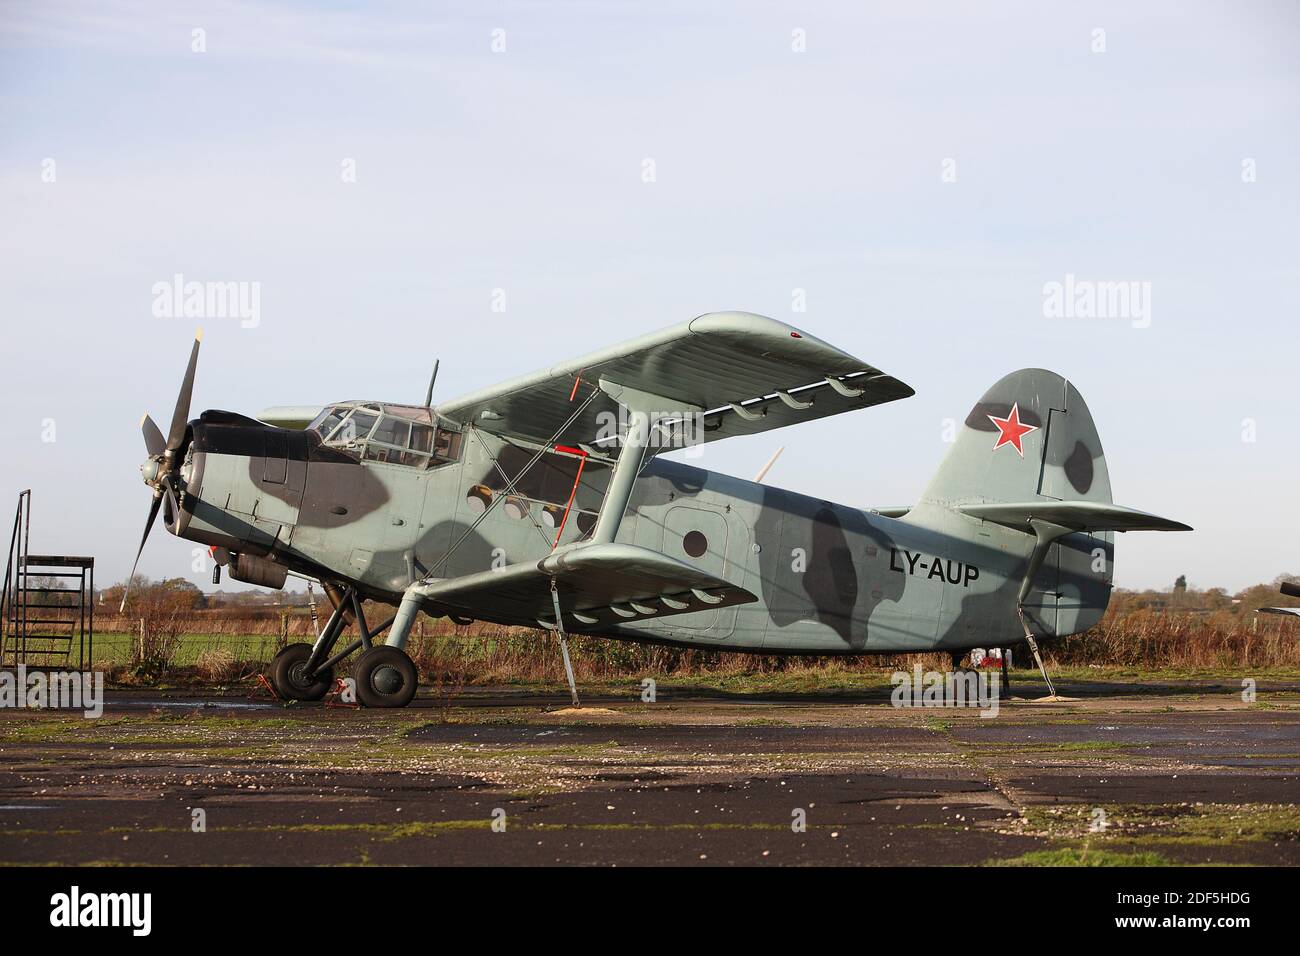 Antonov AN-2 Russian military Biplane call sign LY-AUP Stock Photo